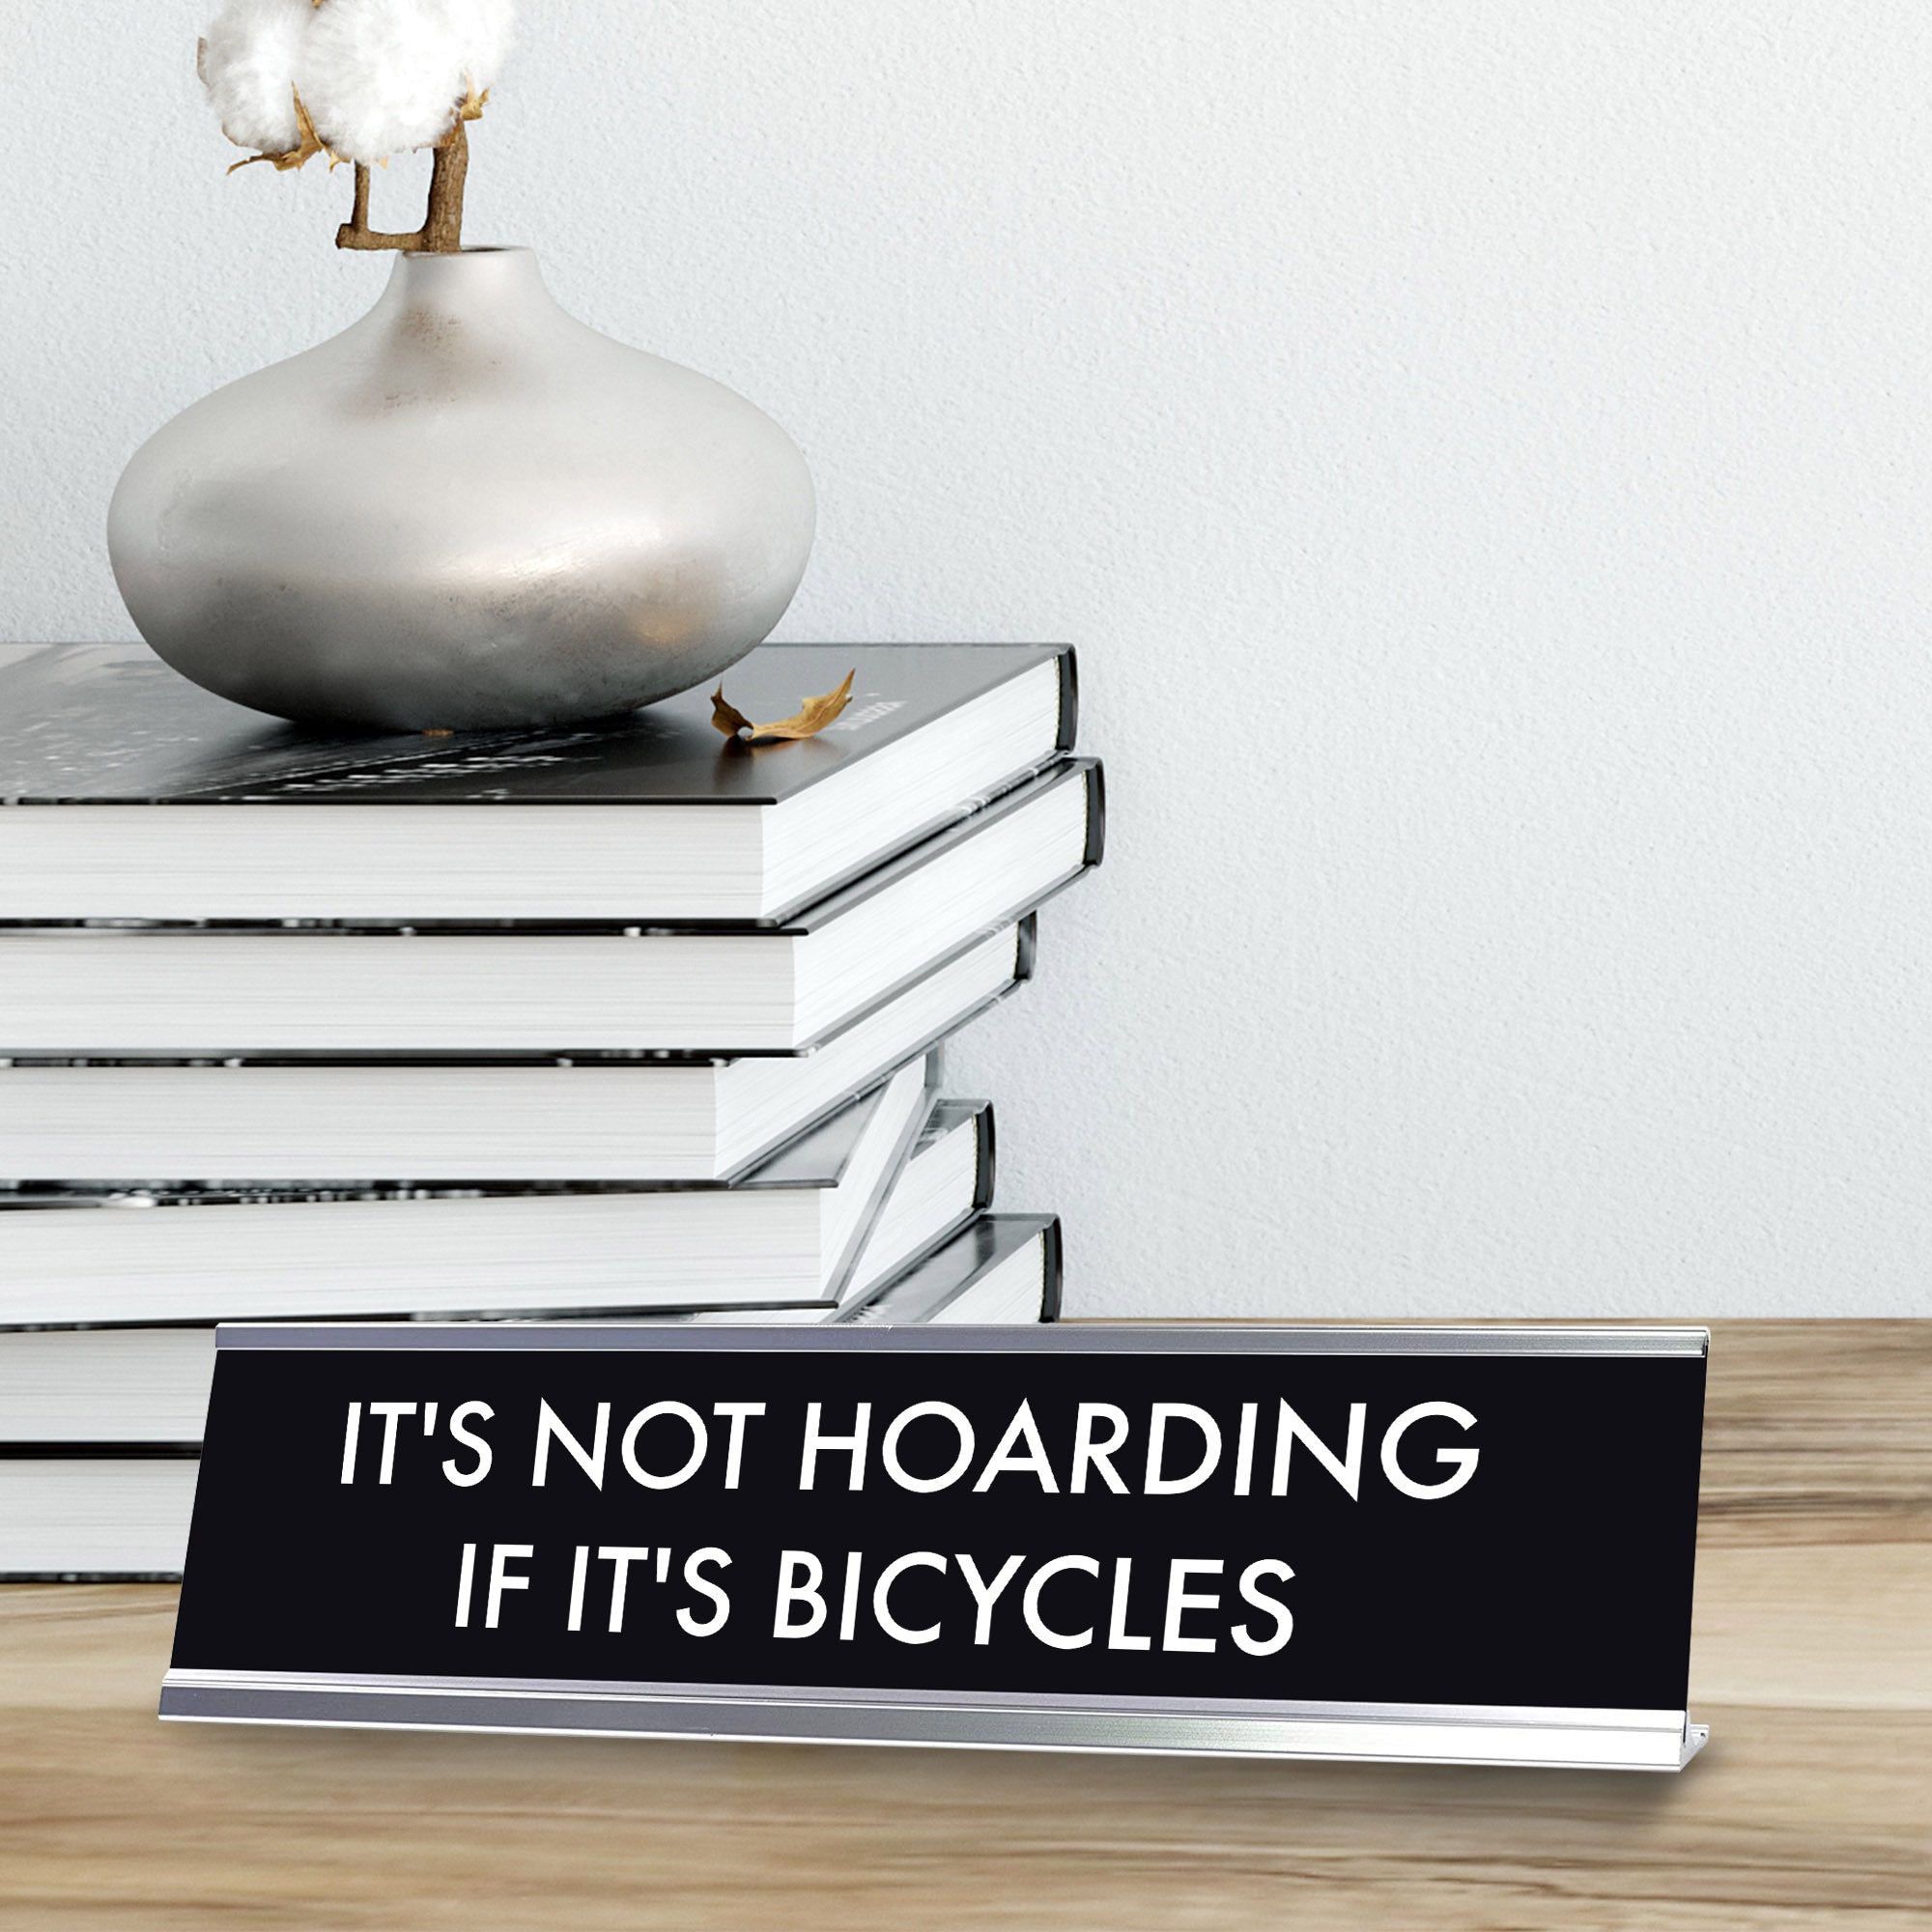 It's Not Hoarding if it's Bicycles, Novelty Desk Sign 2 x 8"